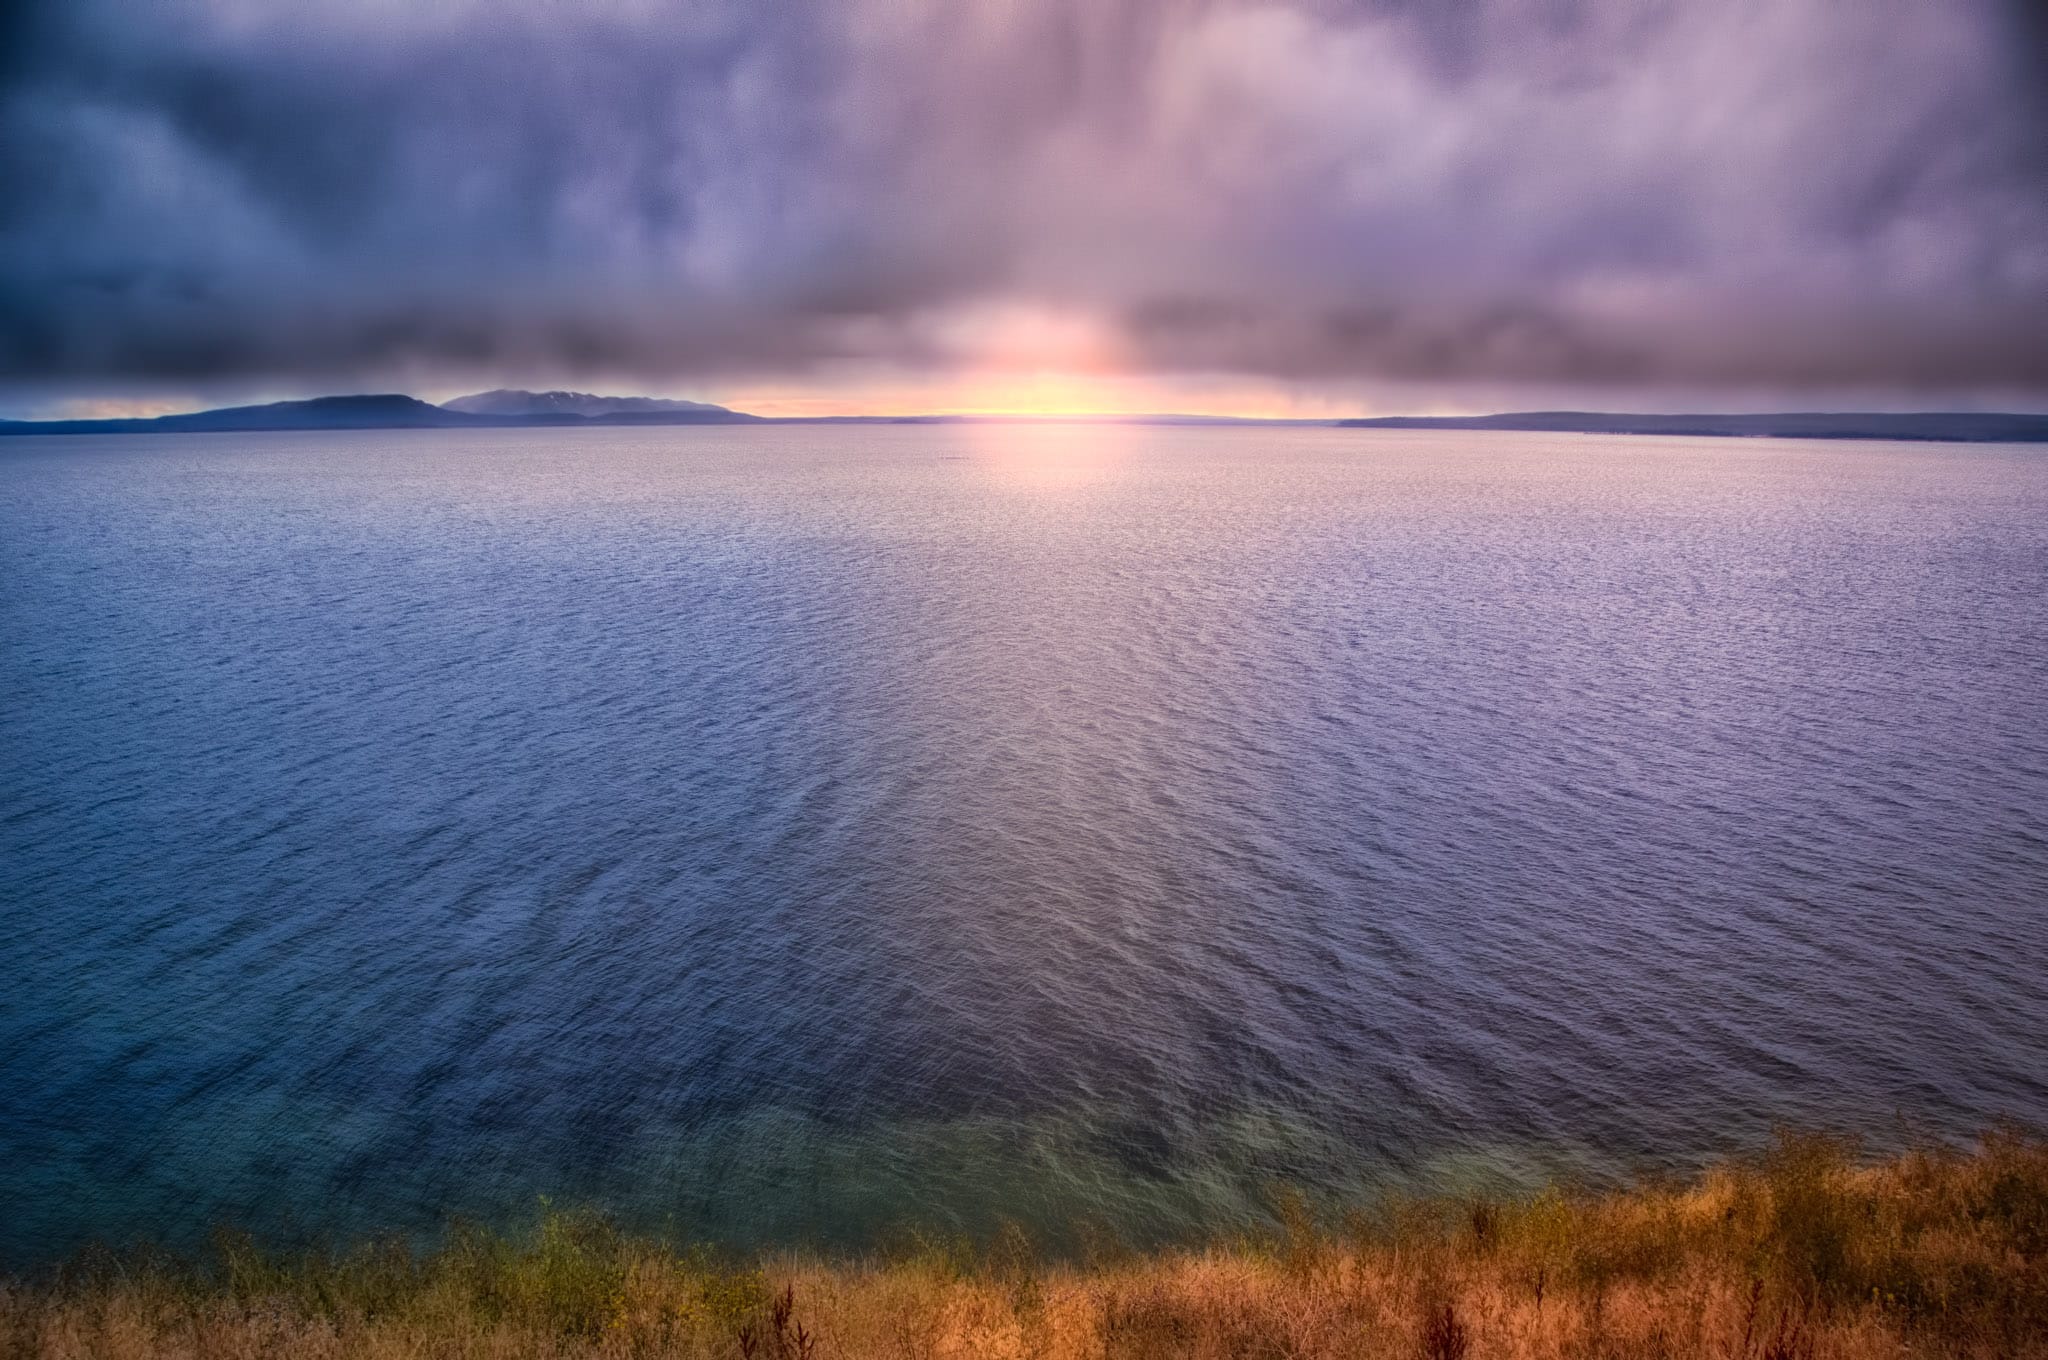 Stormy Sunset at Yellowstone Lake from Steamboat Point in Yellowstone National Park, Wyoming.